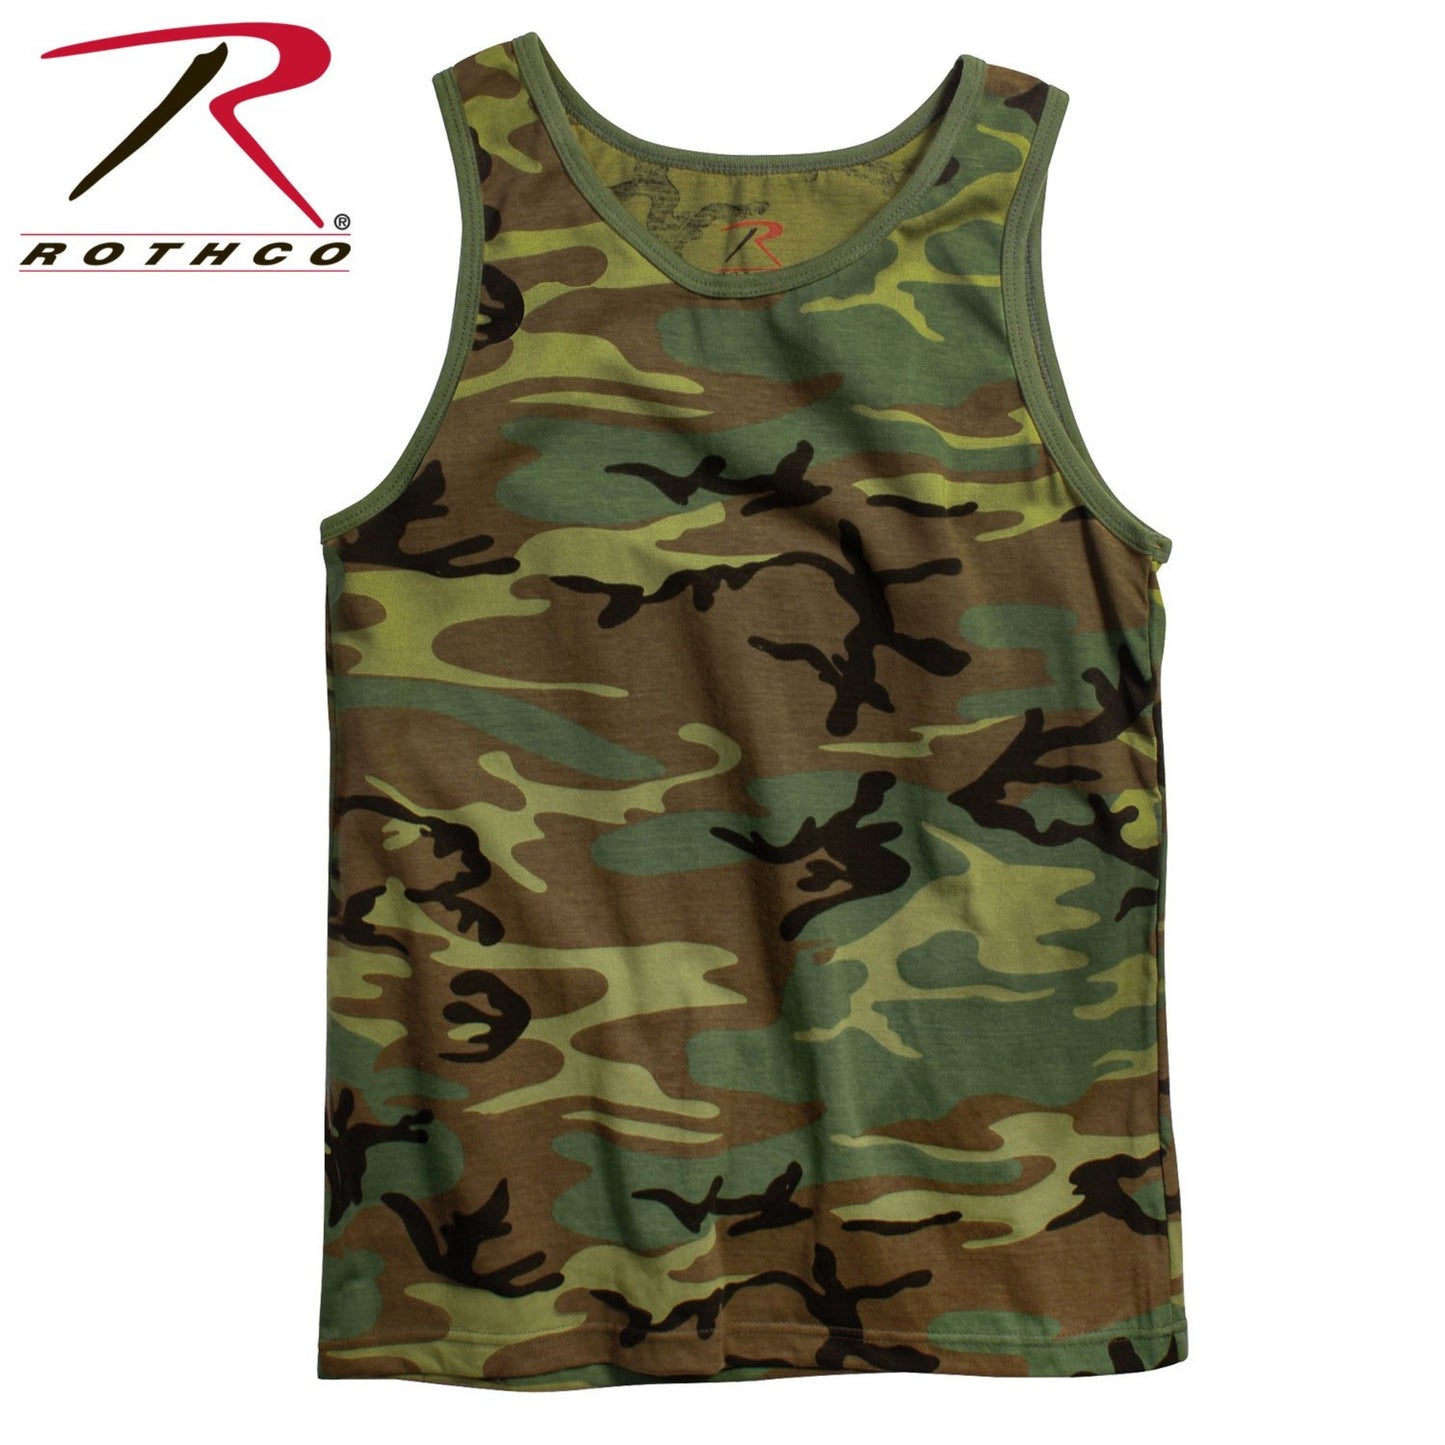 Men's brown, green and black camo tank top from Rothco.